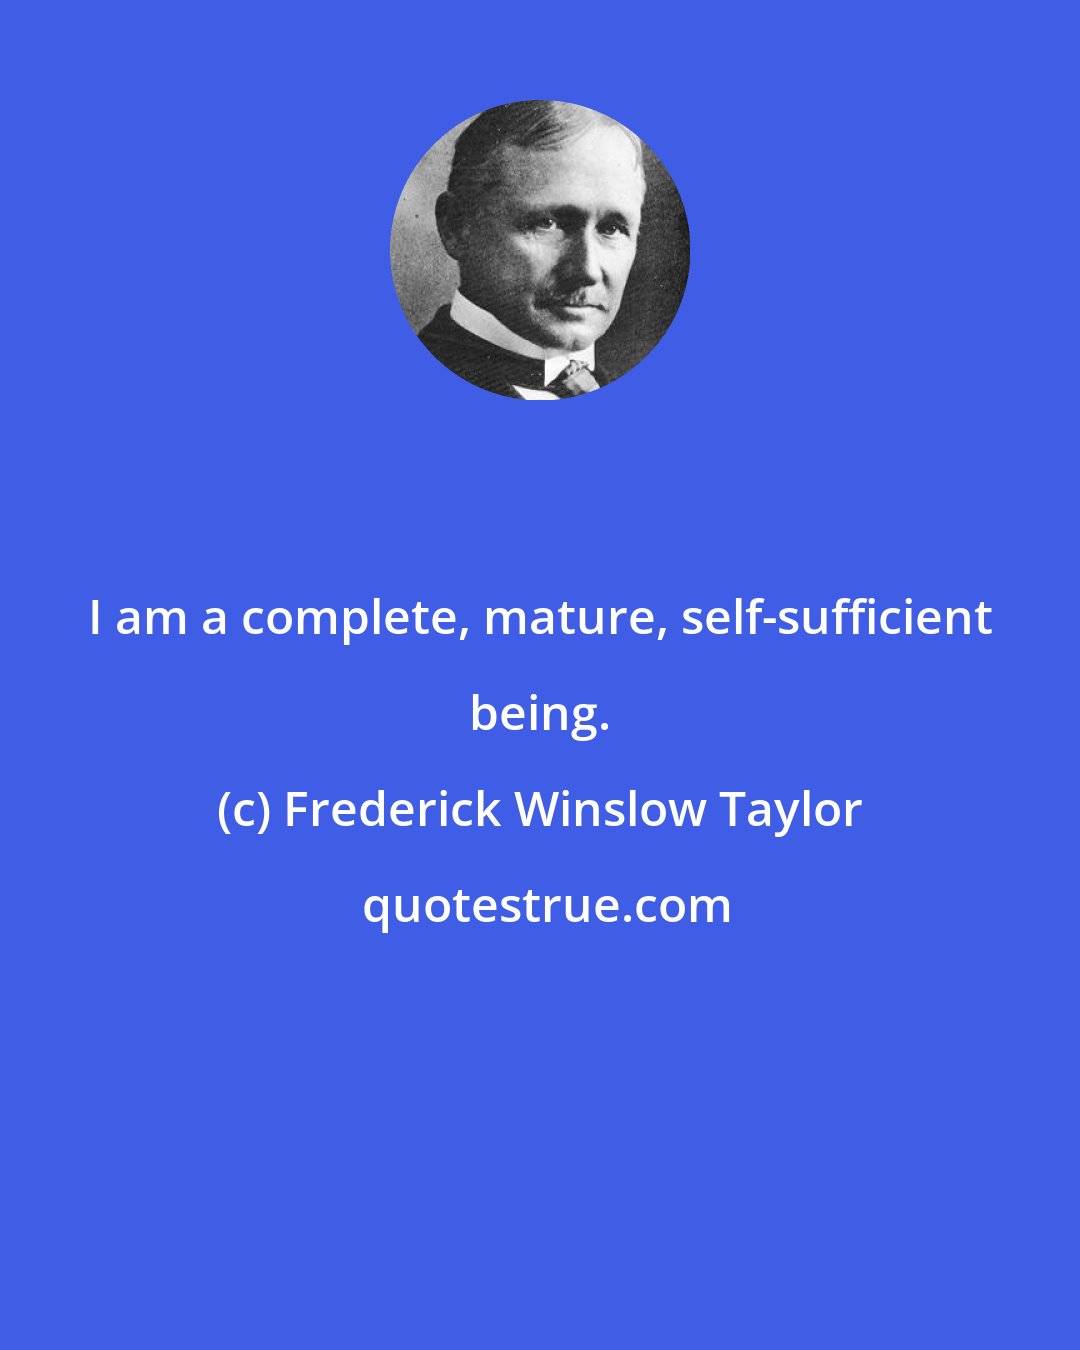 Frederick Winslow Taylor: I am a complete, mature, self-sufficient being.